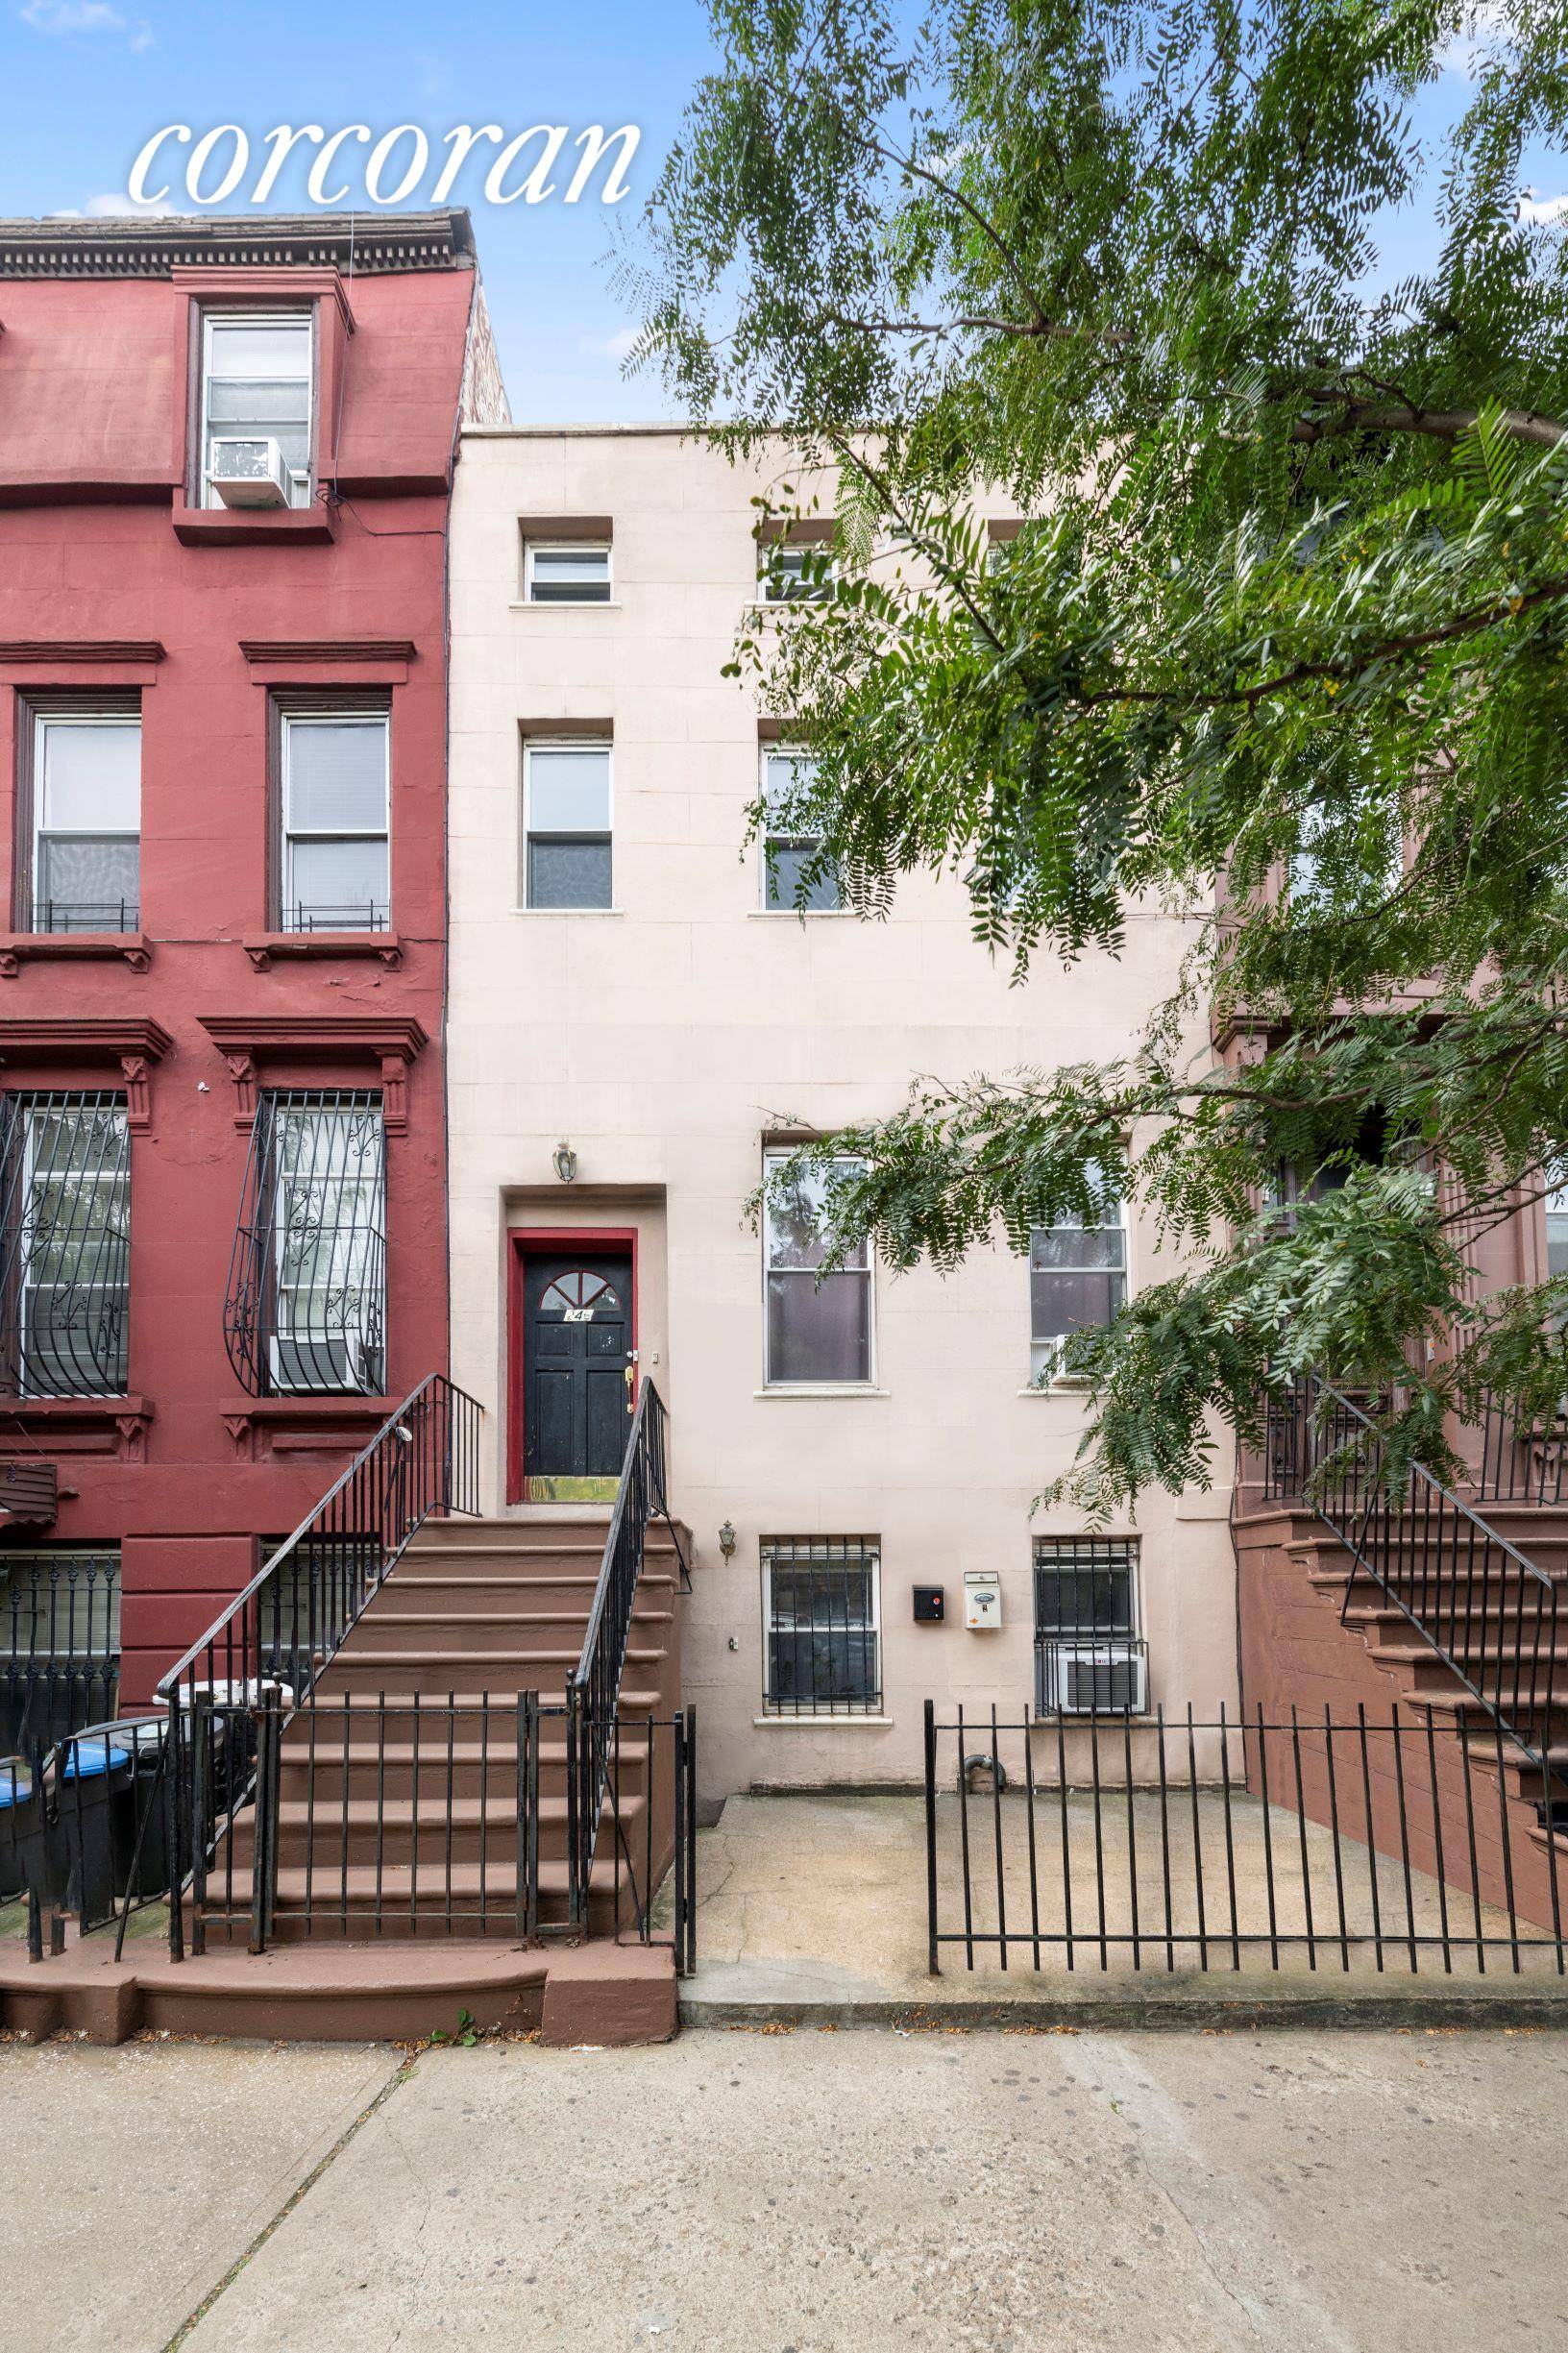 Welcome to 246 Monroe, a two family brick townhouse located on a tree lined block in the Bed Stuy Historic District.